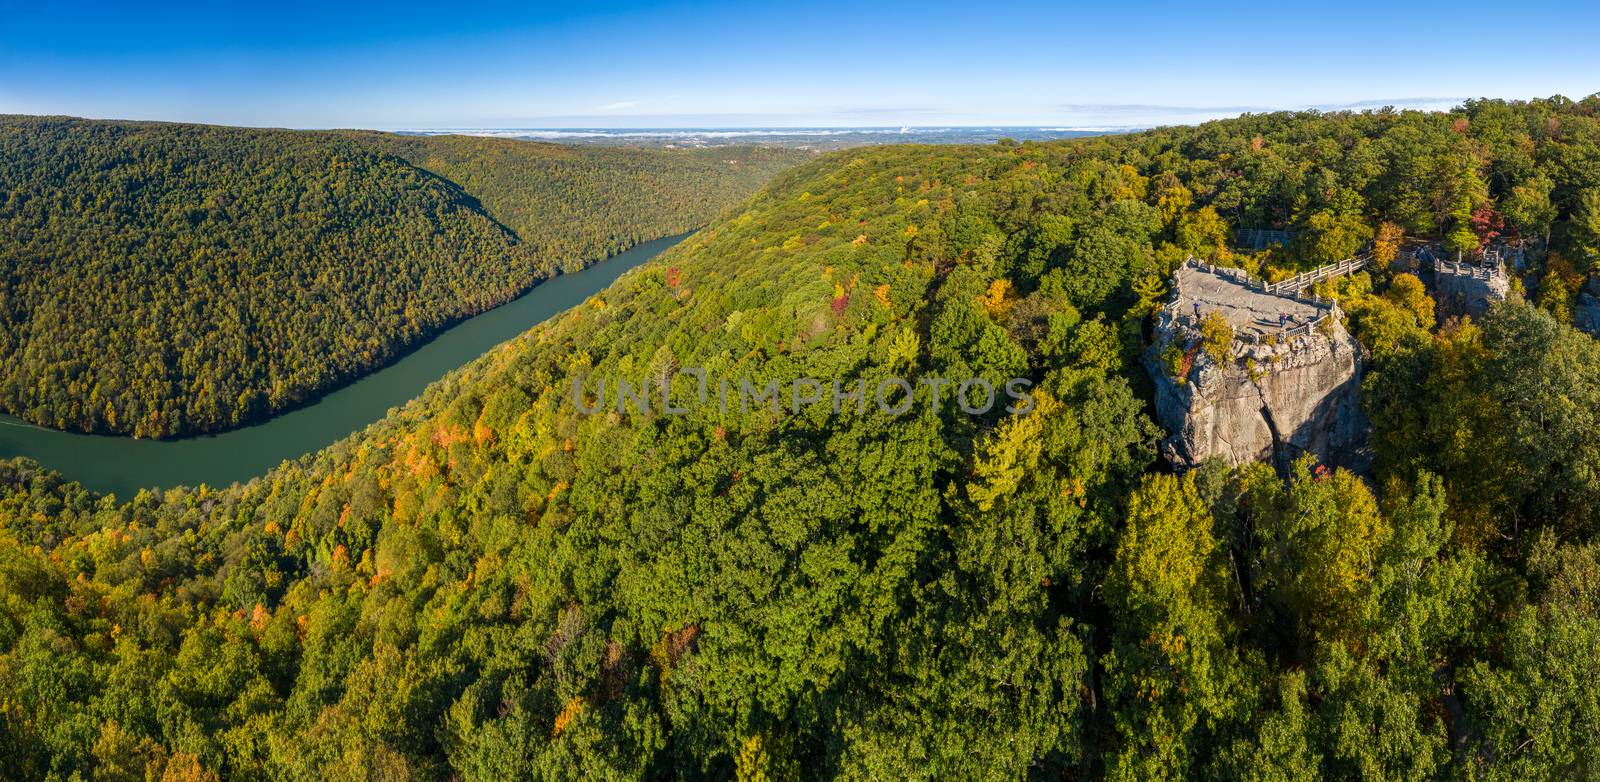 Panorama of Coopers Rock state park overlook over the Cheat River in West Virginia with fall colors by steheap